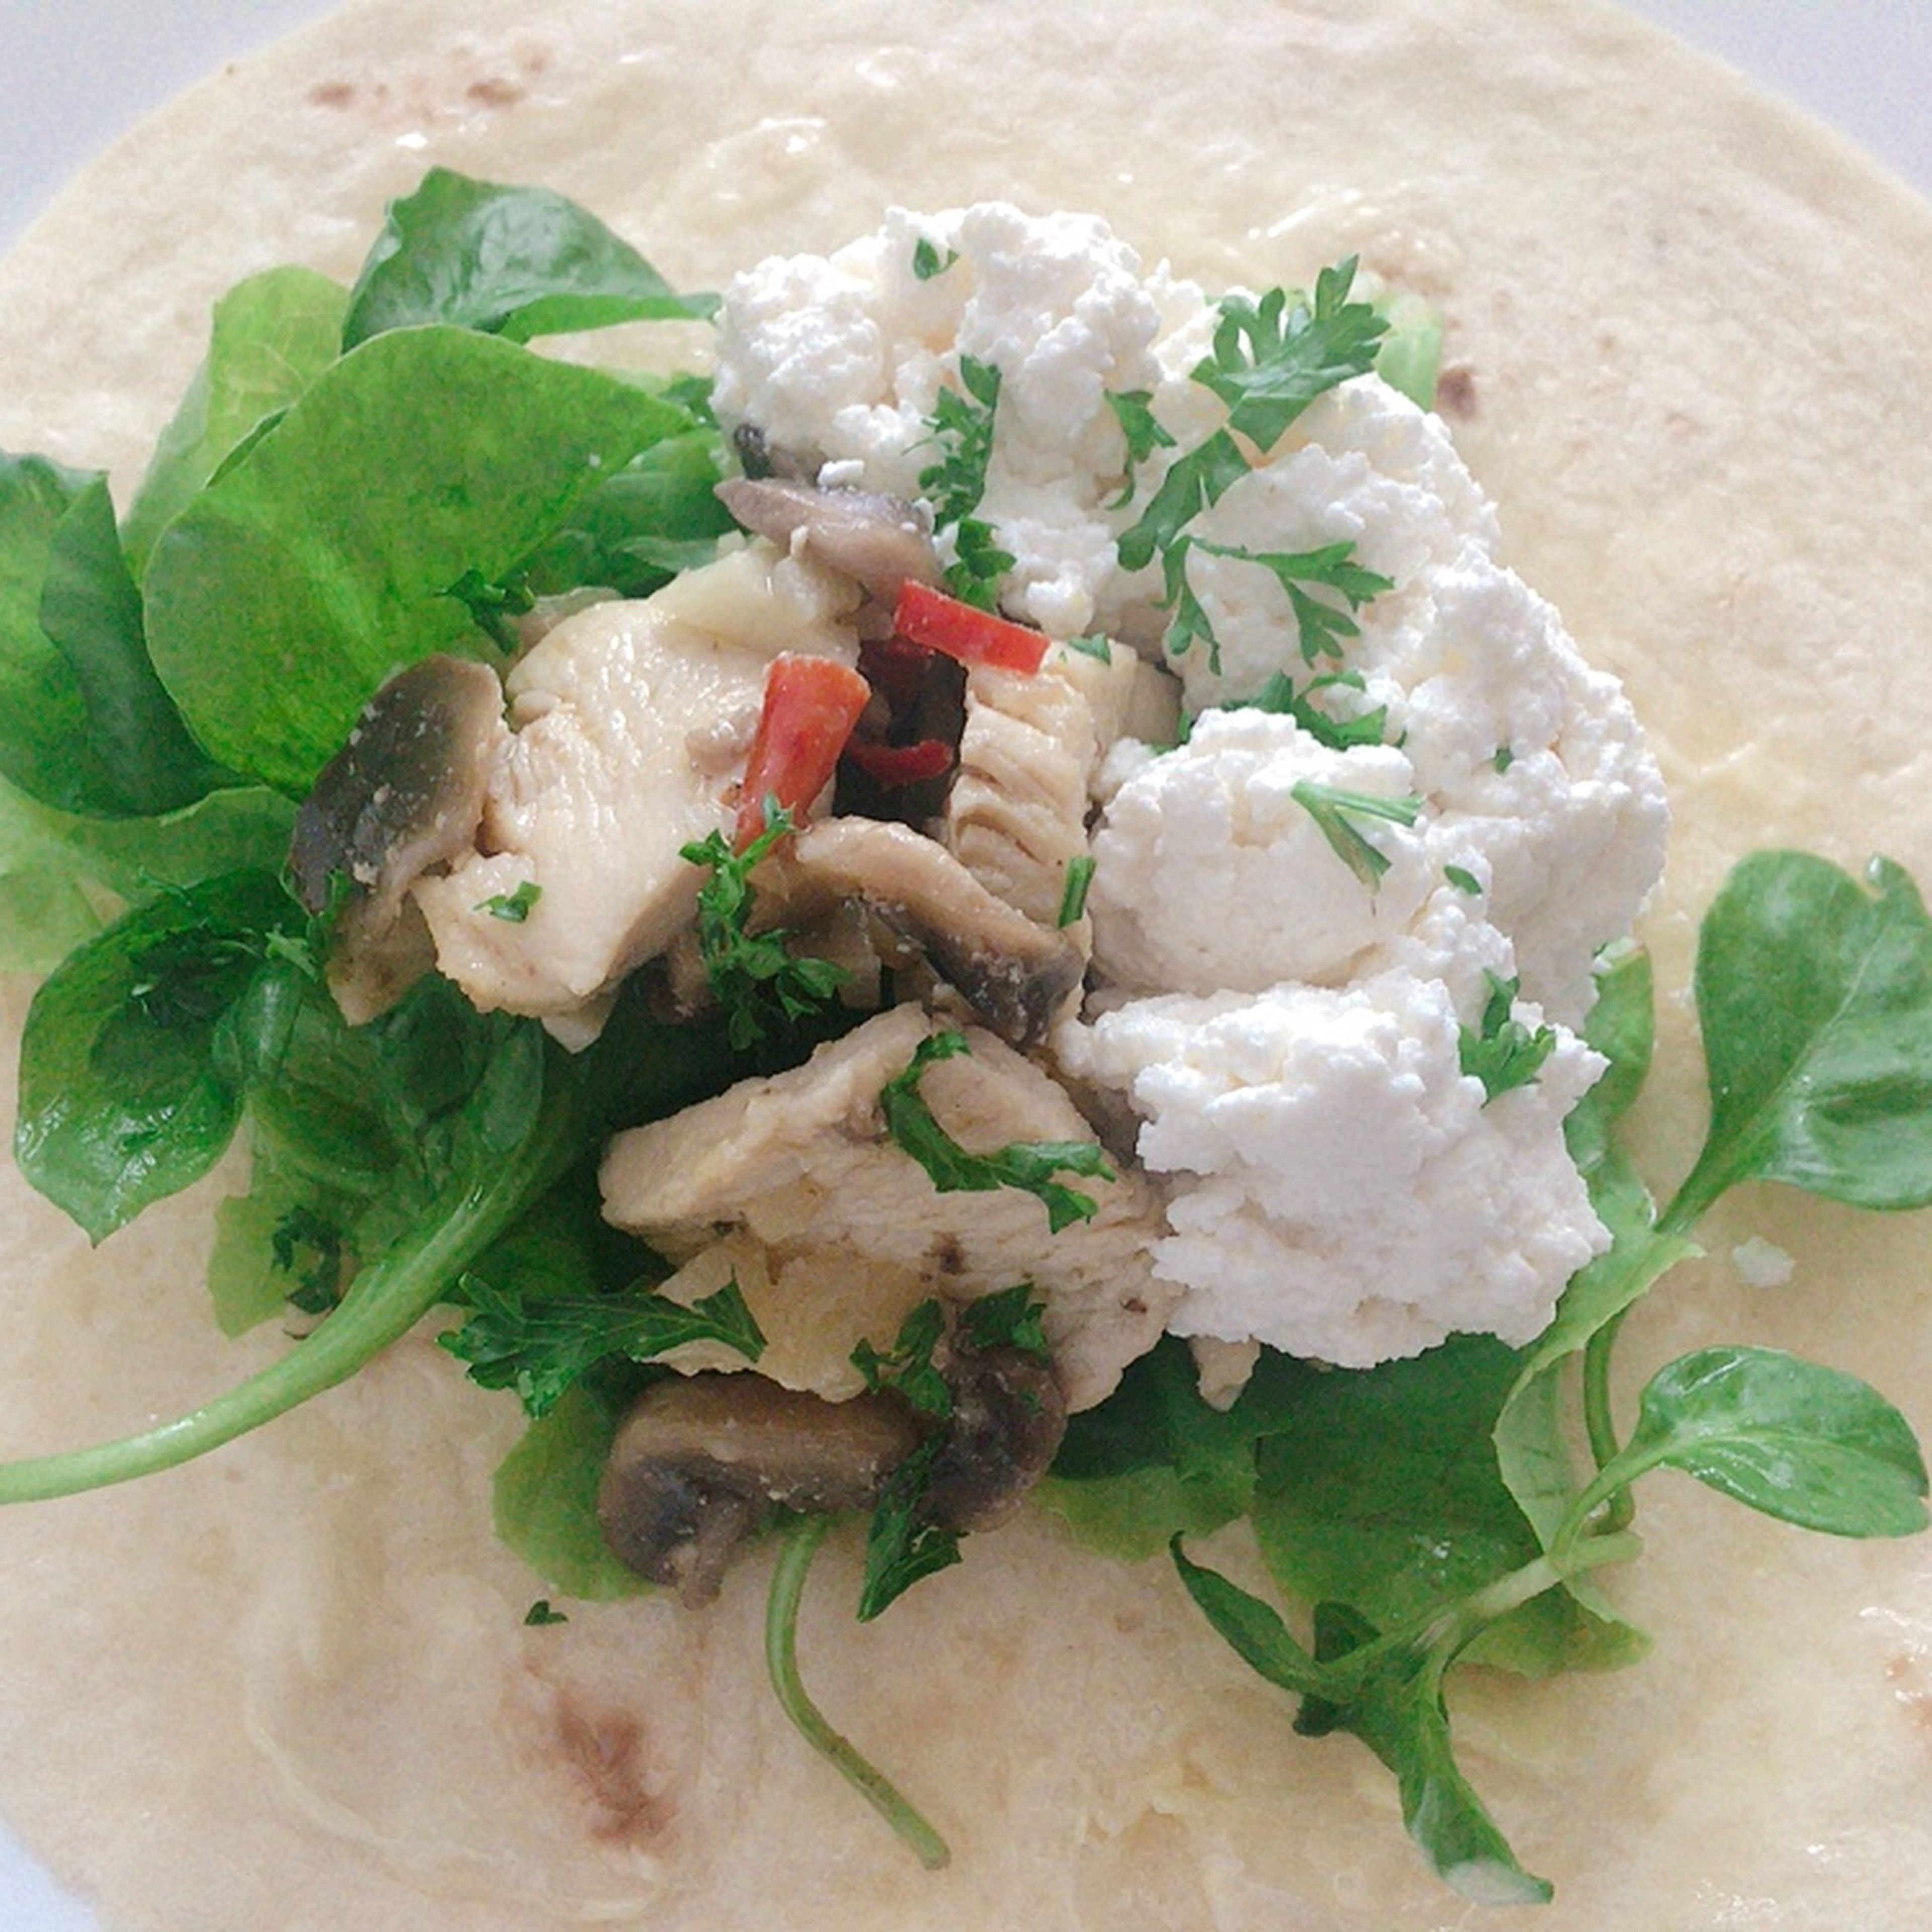 Warm up tortilla on a heated frying pan for a minute. Transfer tortilla to a plate and spread butter when it’s still hot so butter nicely melts. If you have canned liver pâté, you can also spread it over as it adds good saltiness and flavour to the dish. Place the filling, watercress, lettuce and cottage cheese on tortilla. Sprinkle parsley and add a few drops of balsamic vinegar. Lastly, wrap it and enjoy the dish.